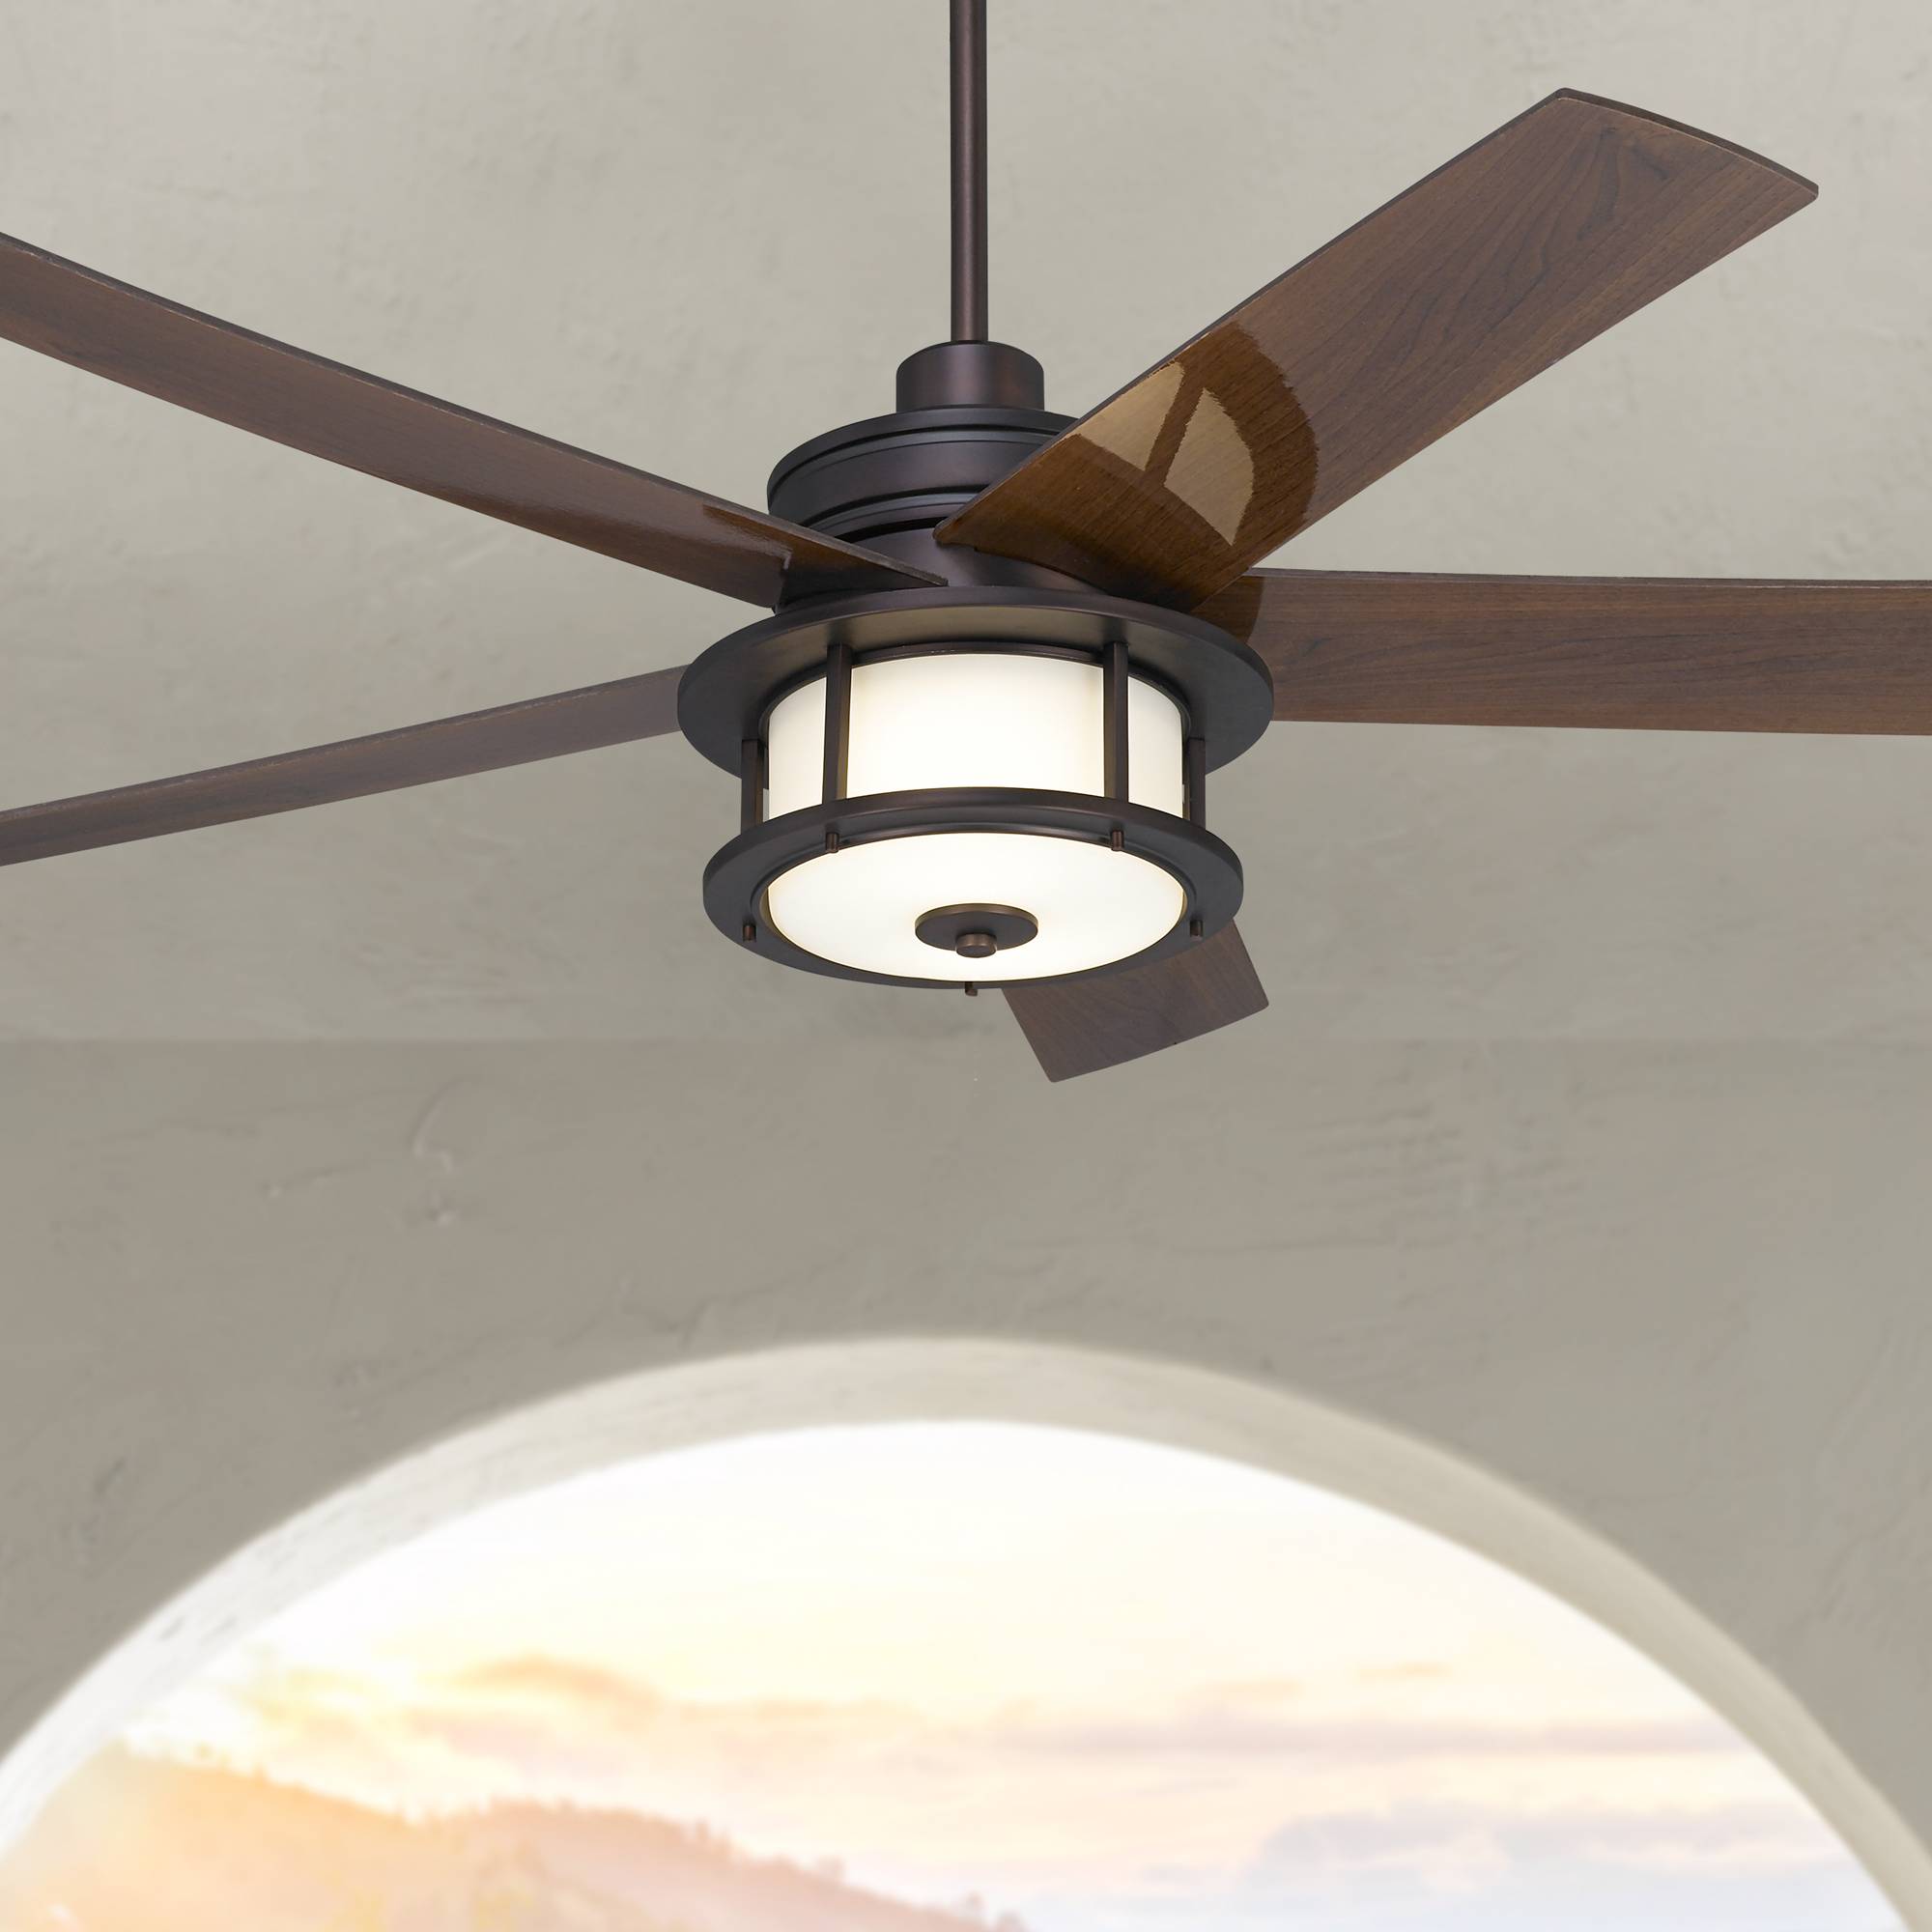 Details About 60 Modern Outdoor Ceiling Fan With Light Led Brushed Bronze Damp Patio Porch